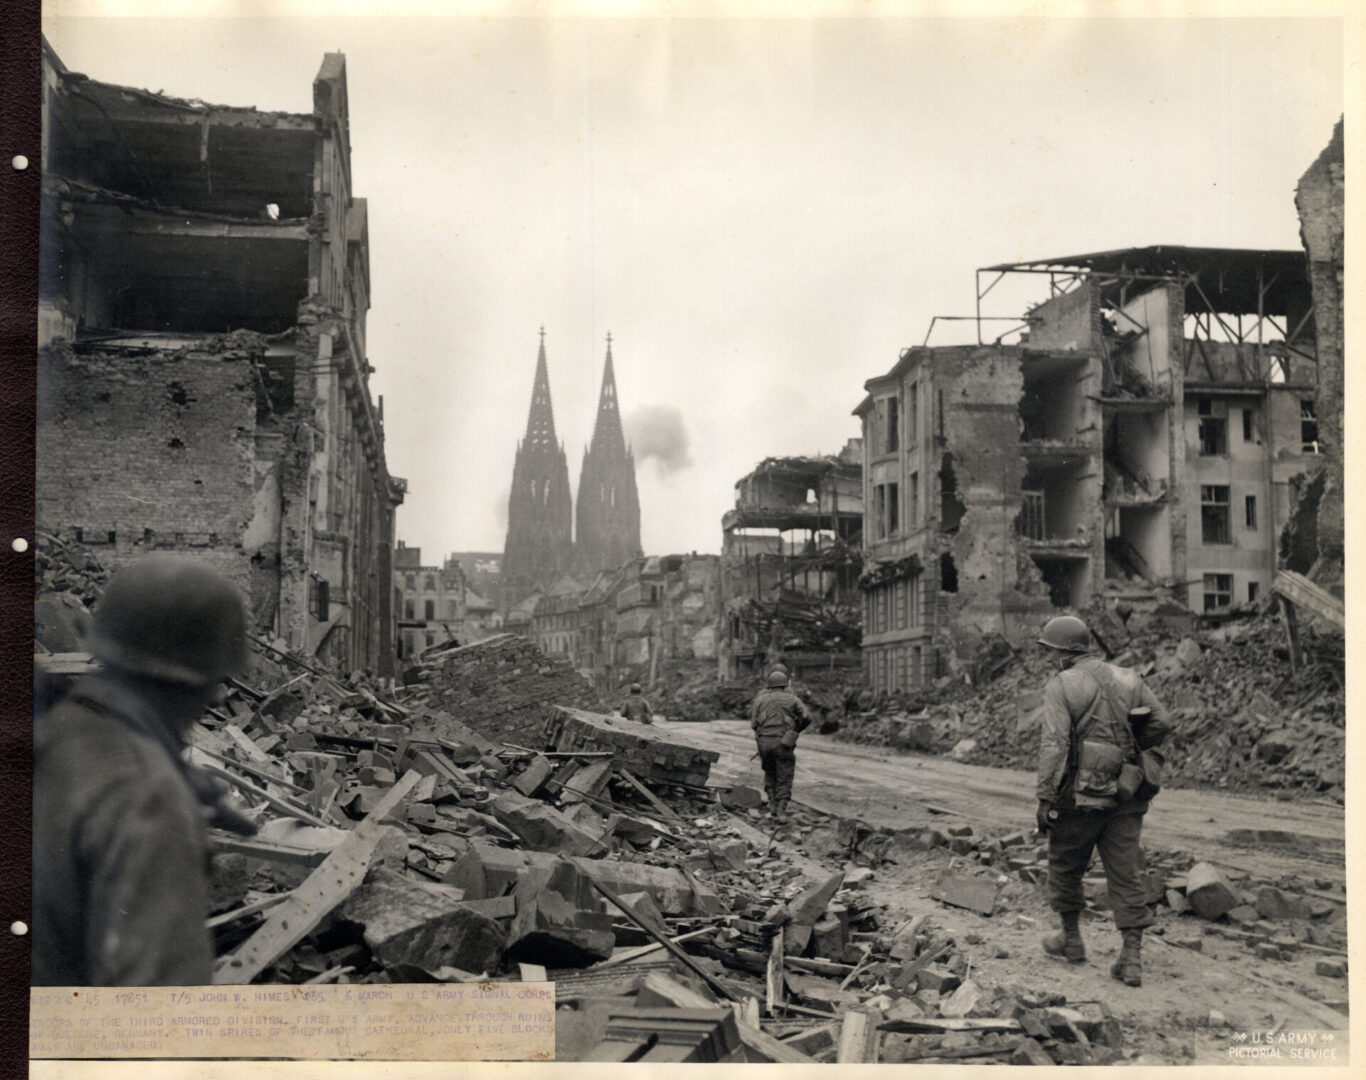 American troops move into the ruined town of Cologne